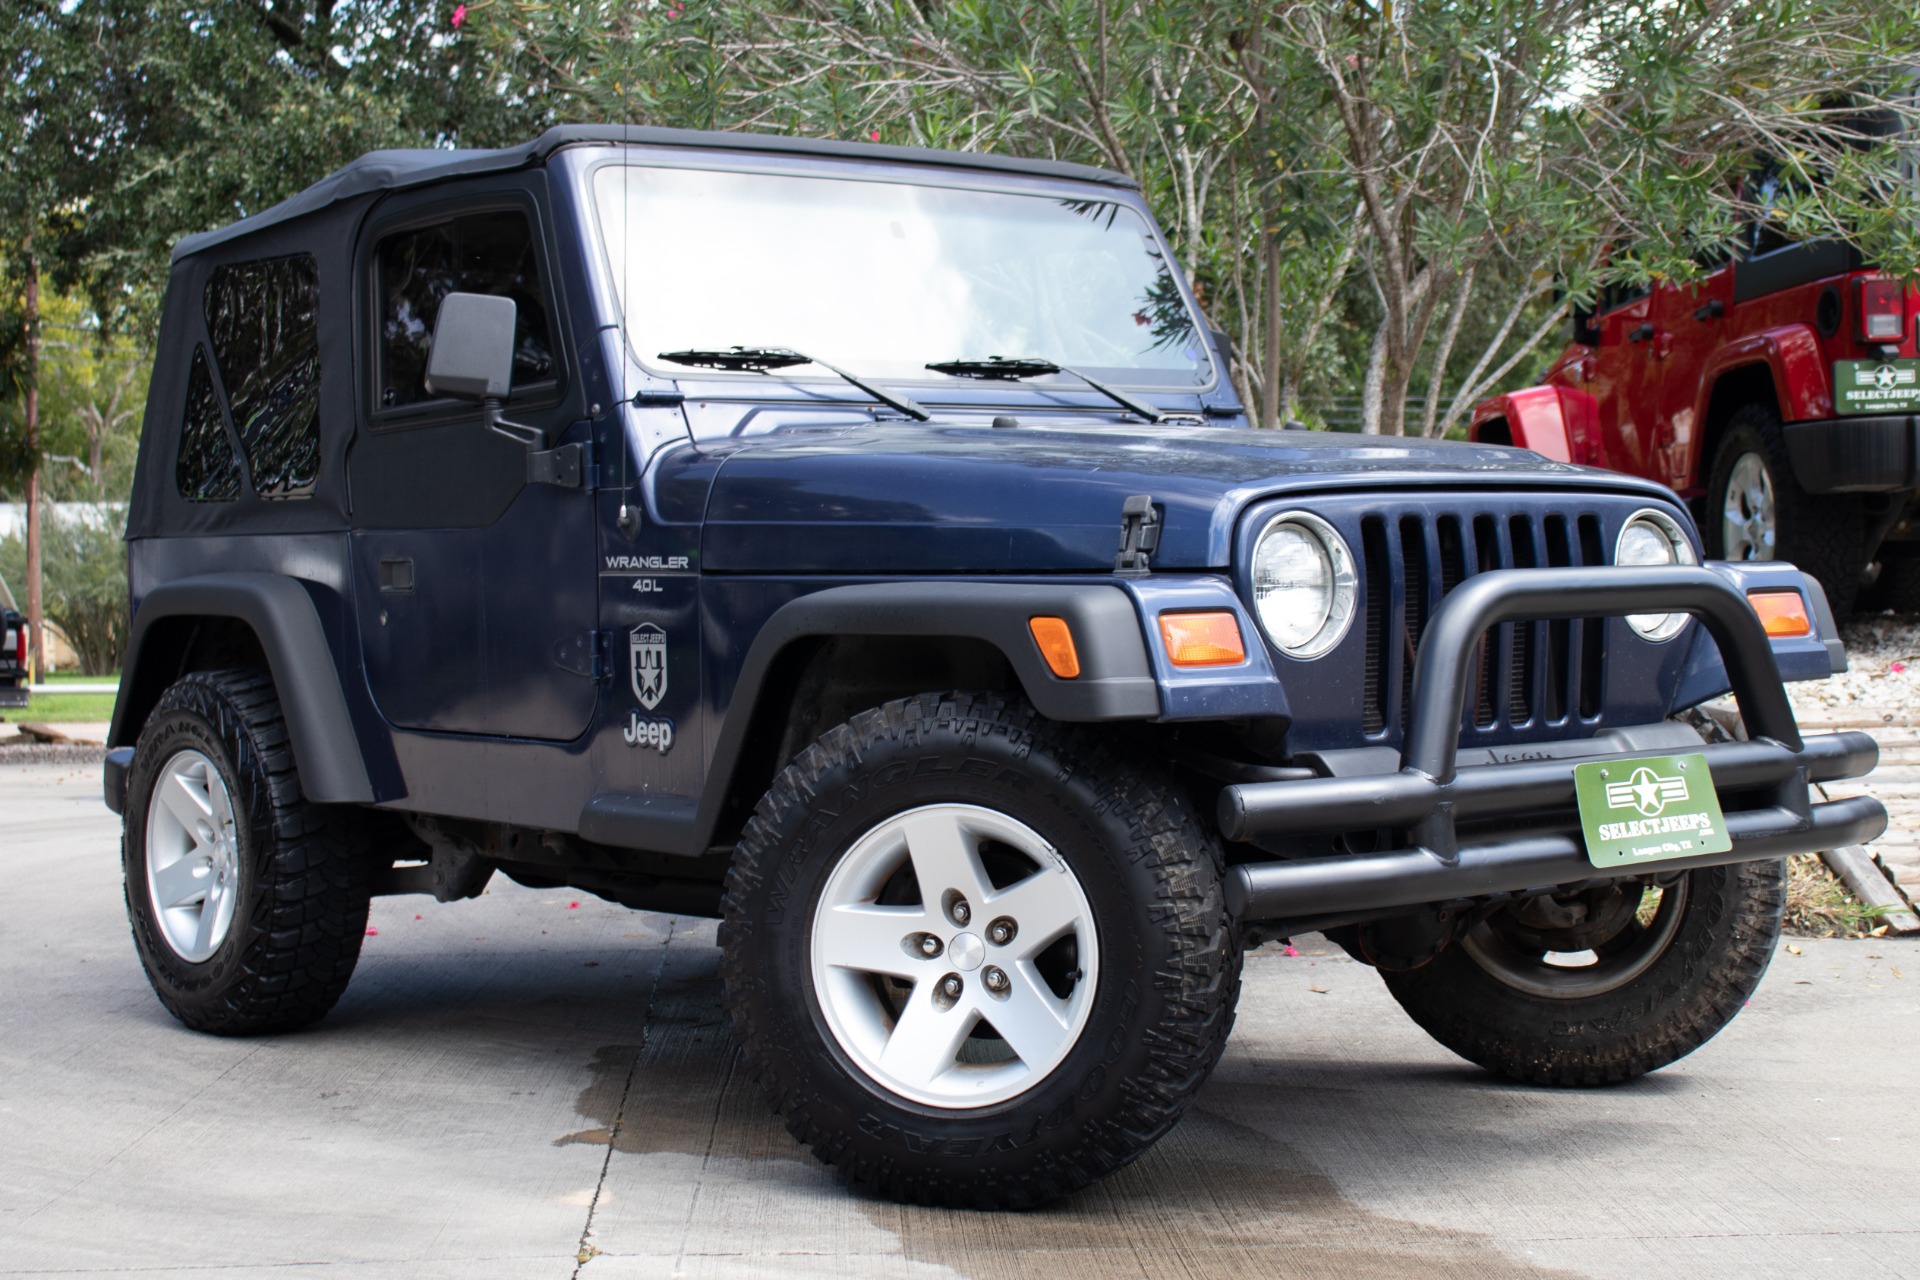 Used 1997 Jeep Wrangler 2dr Sport For Sale ($8,995) | Select Jeeps Inc.  Stock #549447